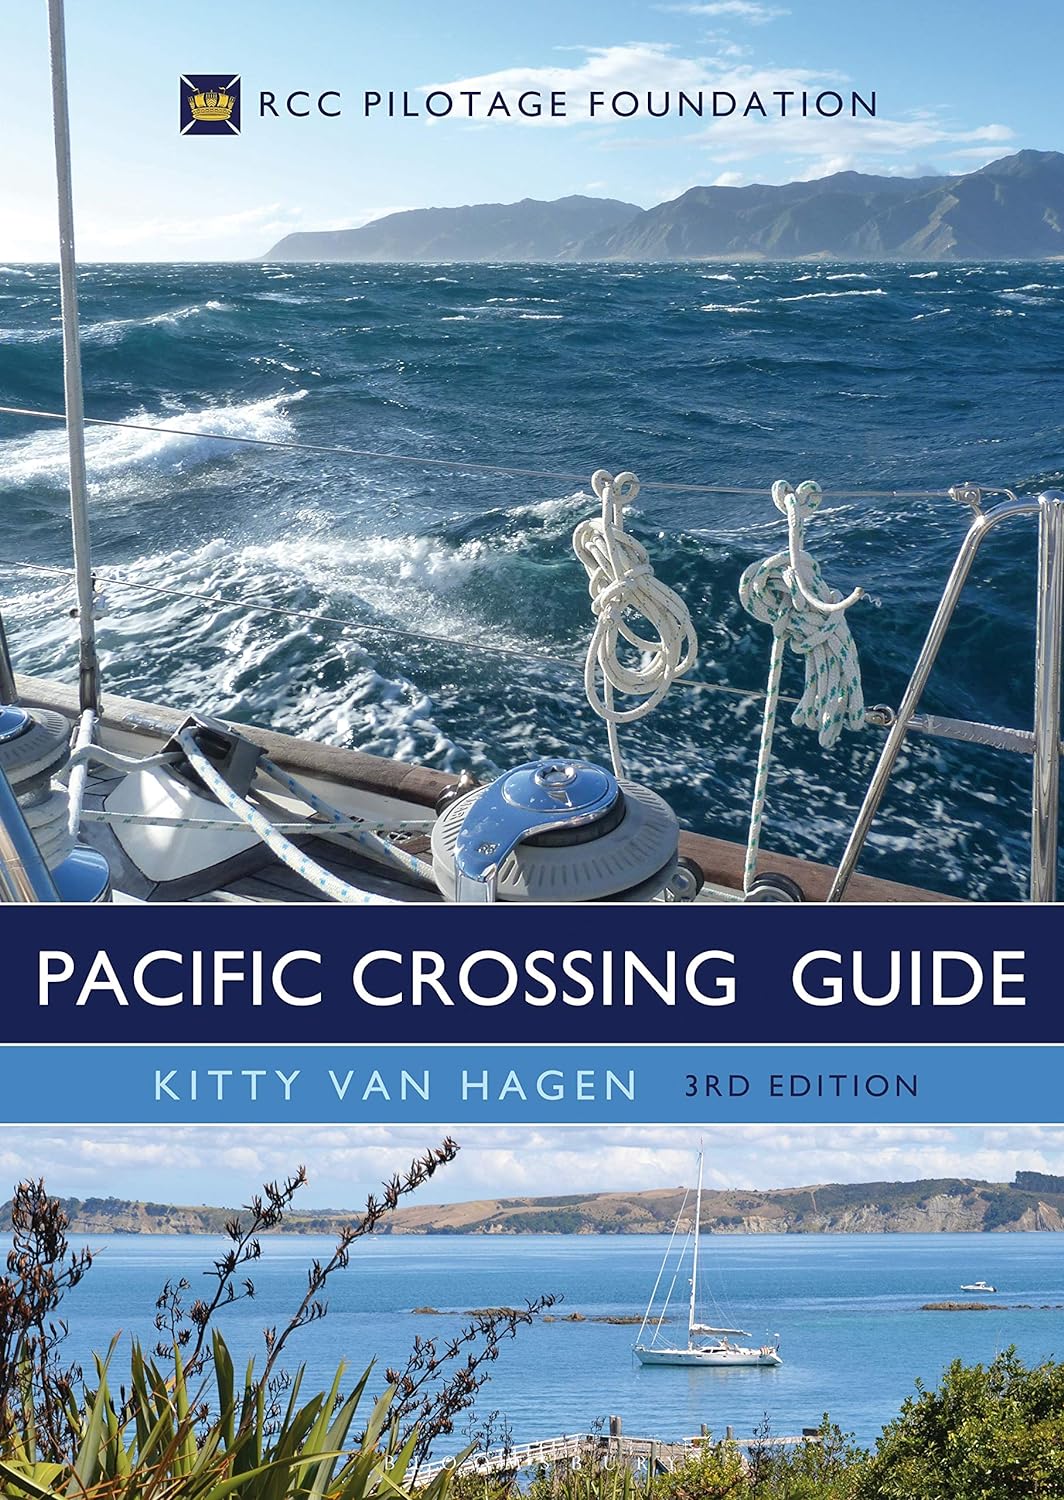 The Pacific Crossing Guide, 3rd Edition